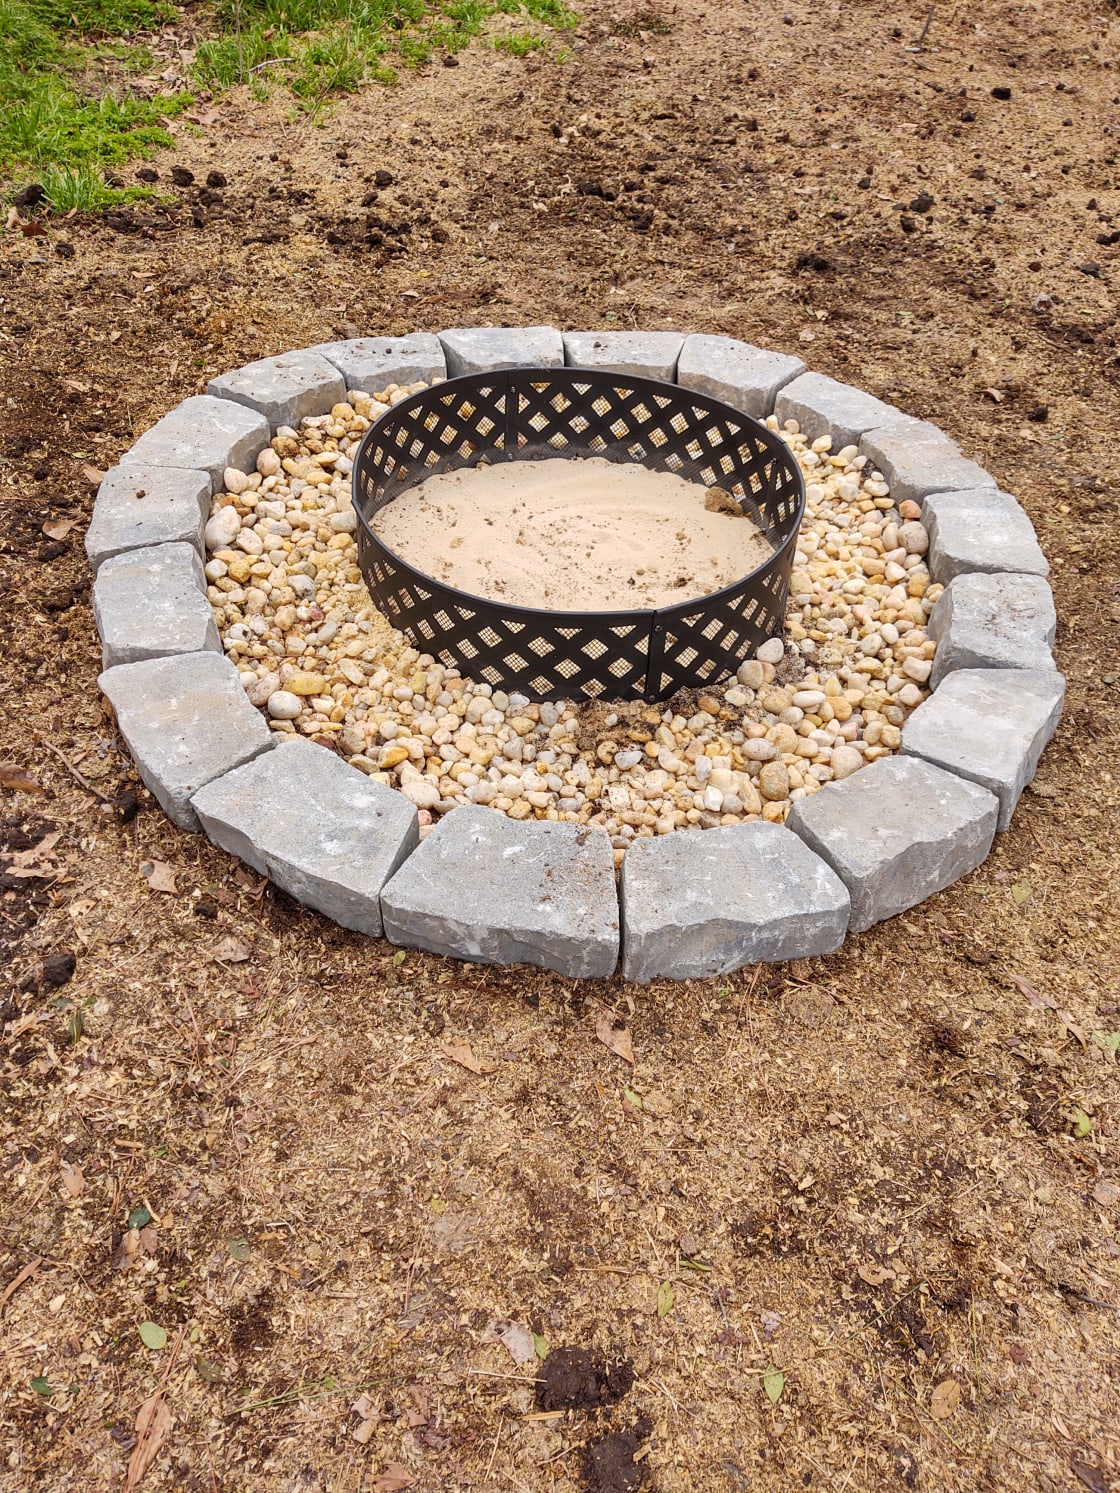 Fire pit - use allowed depending on wind and potentially too  too